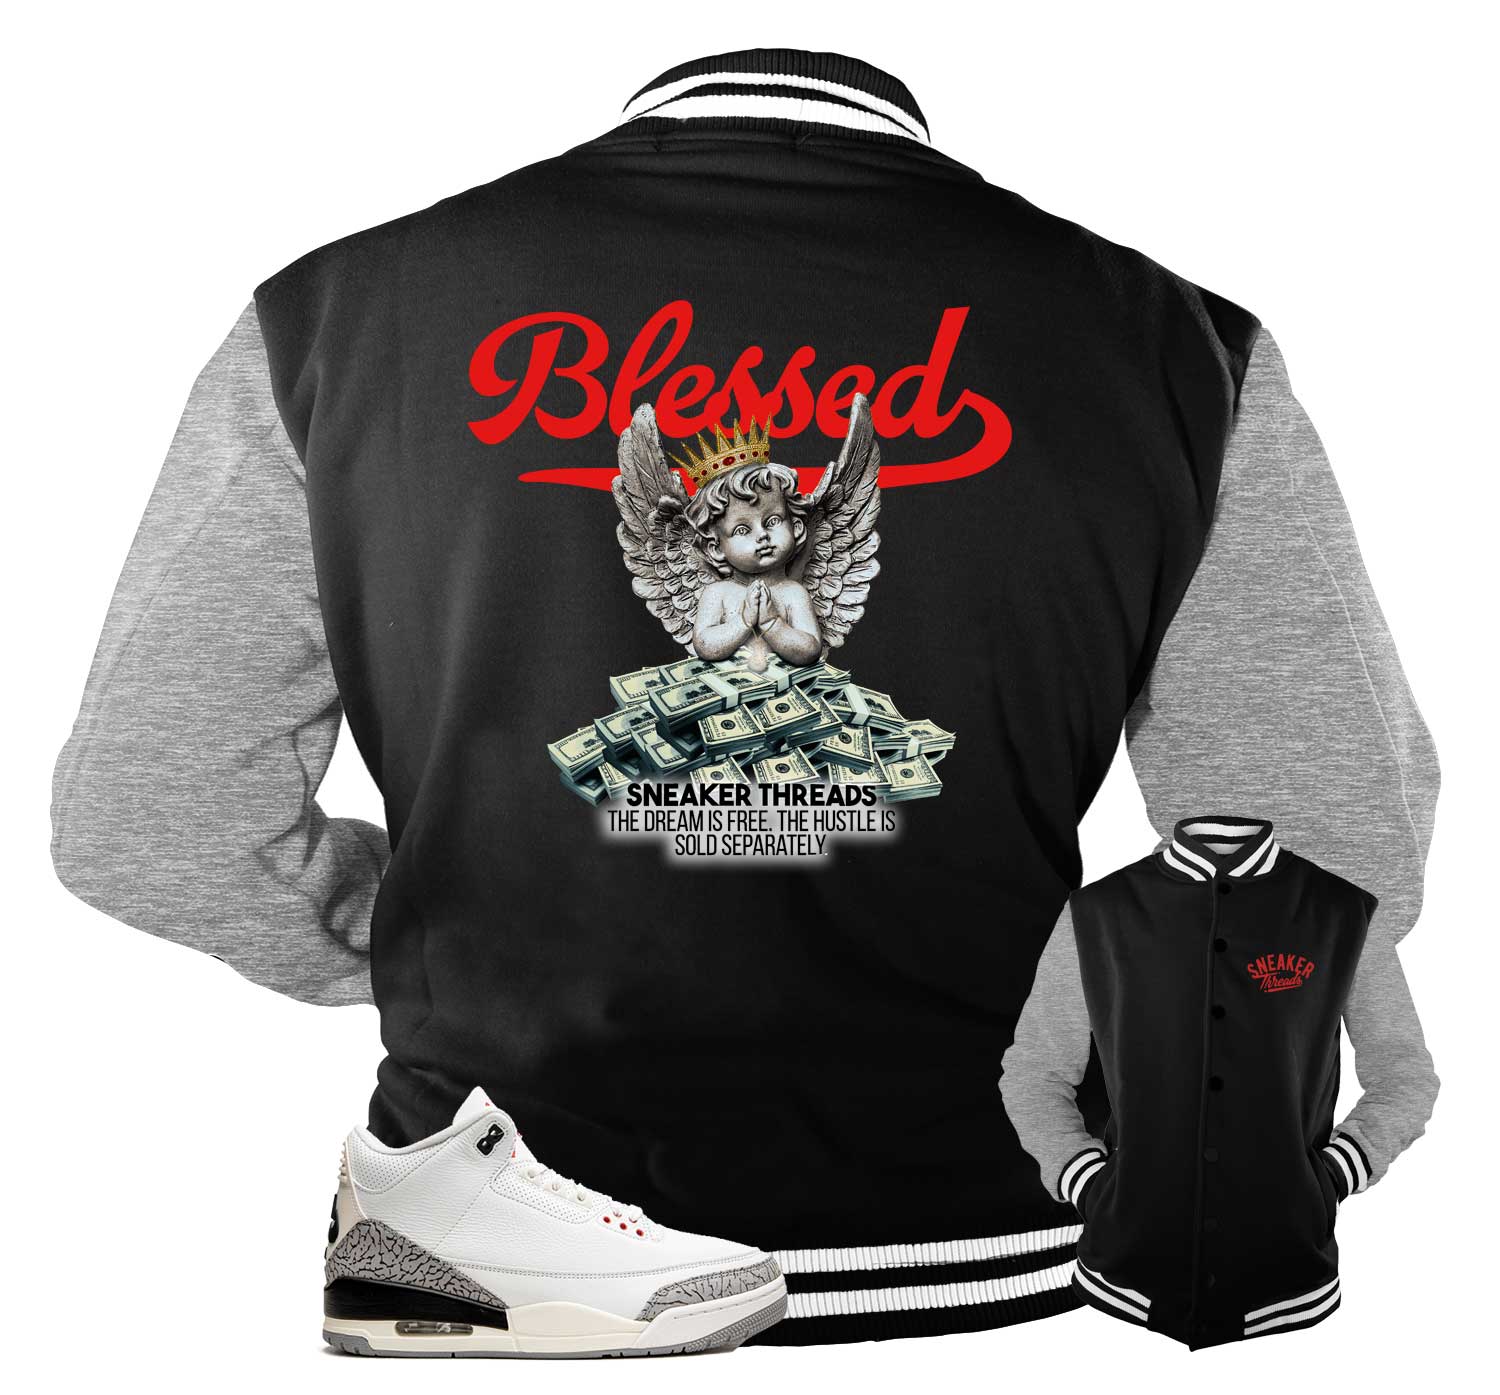 Retro 3 White Cement Reimagined Jacket - Blessed Angel - Black